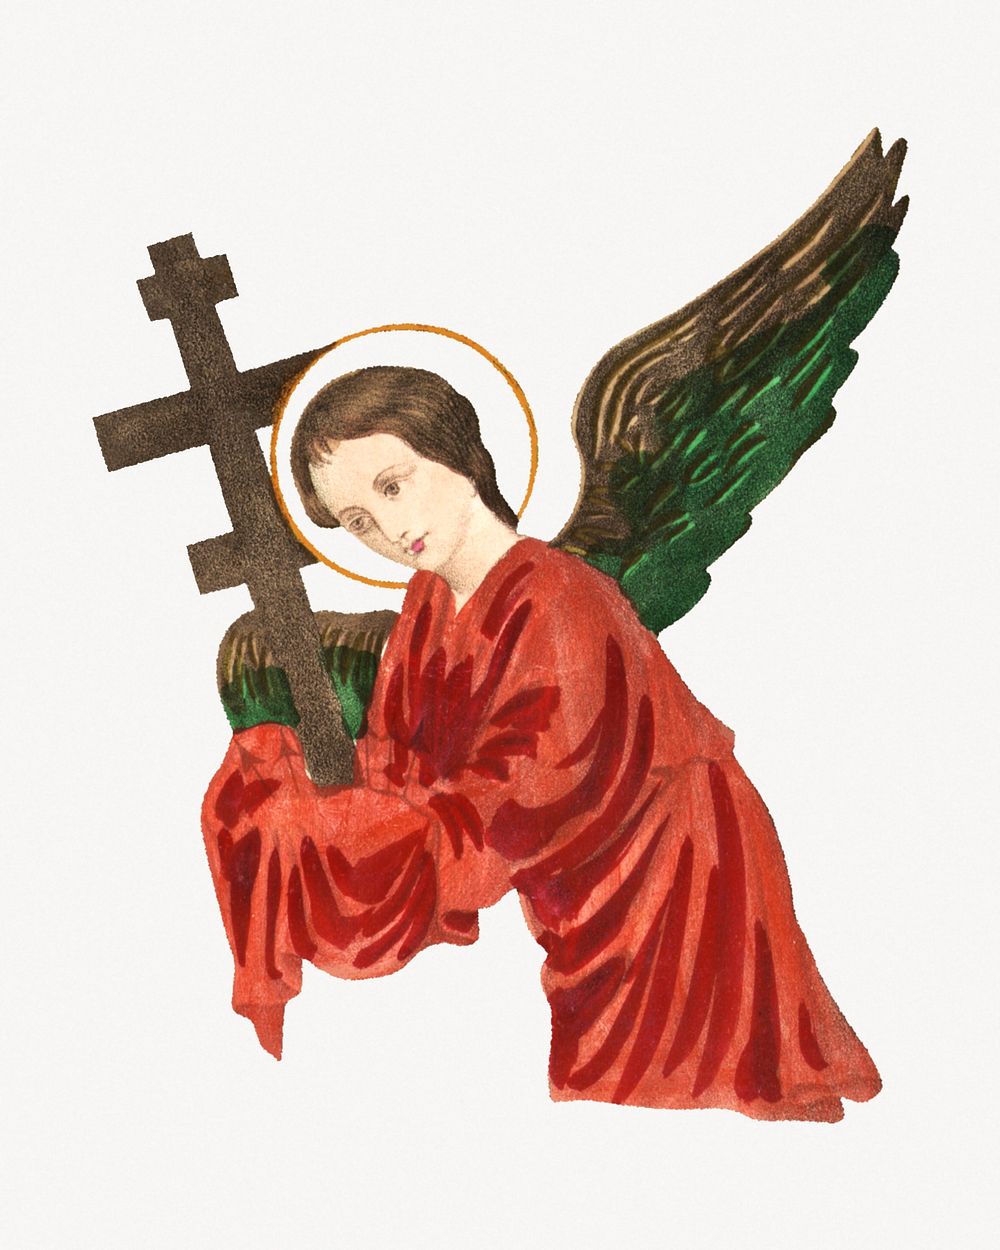 Angel holding cross, vintage religious illustration.   Remastered by rawpixel